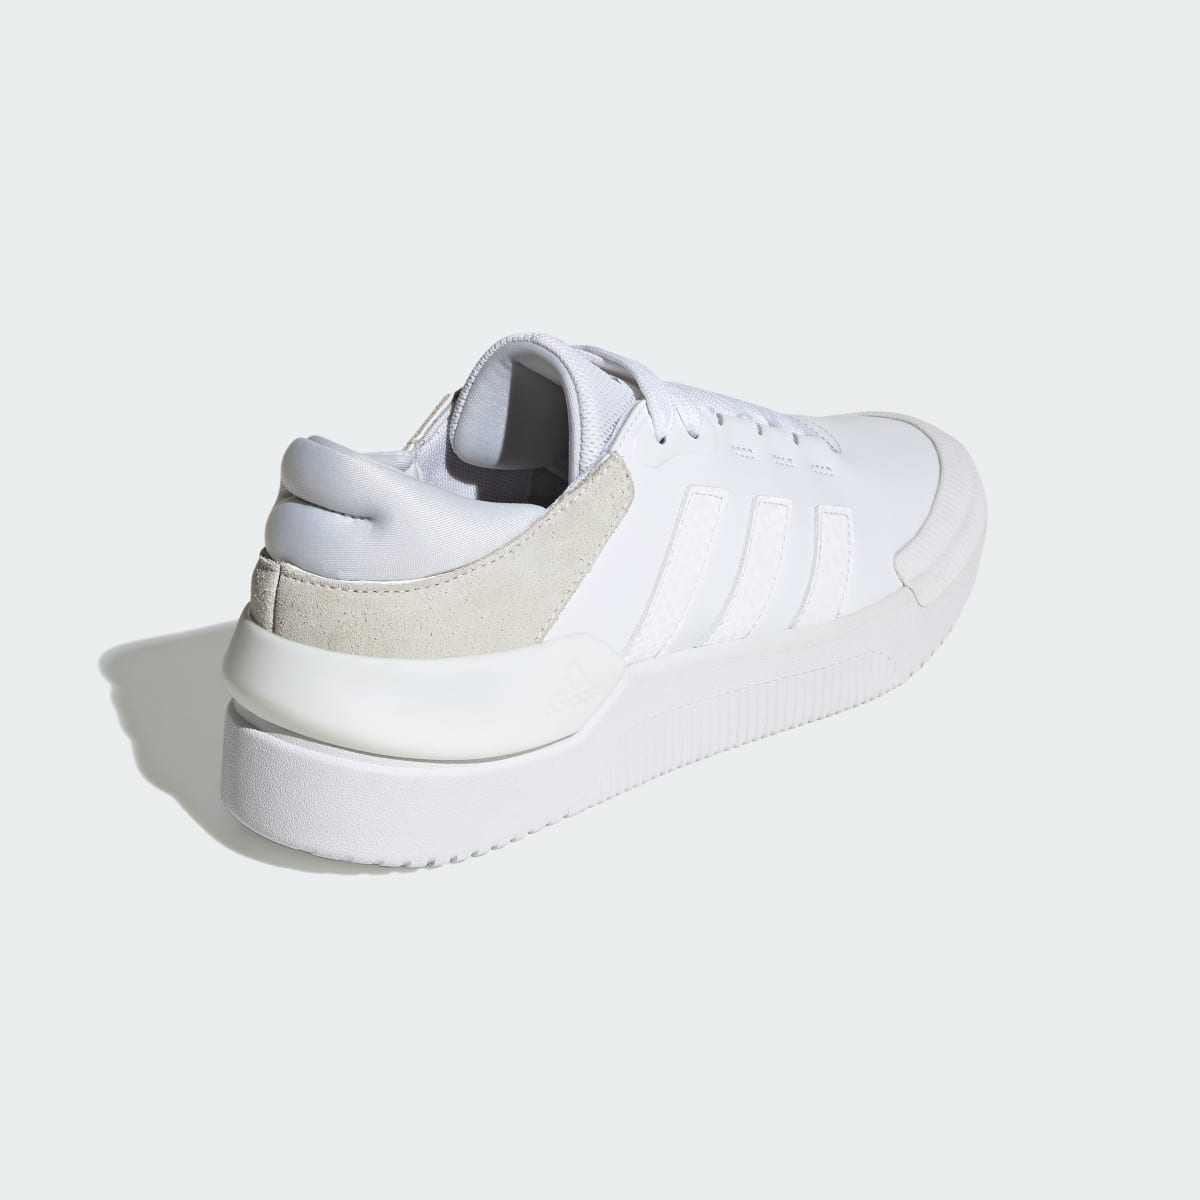 Adidas Court Funk Shoes. 6